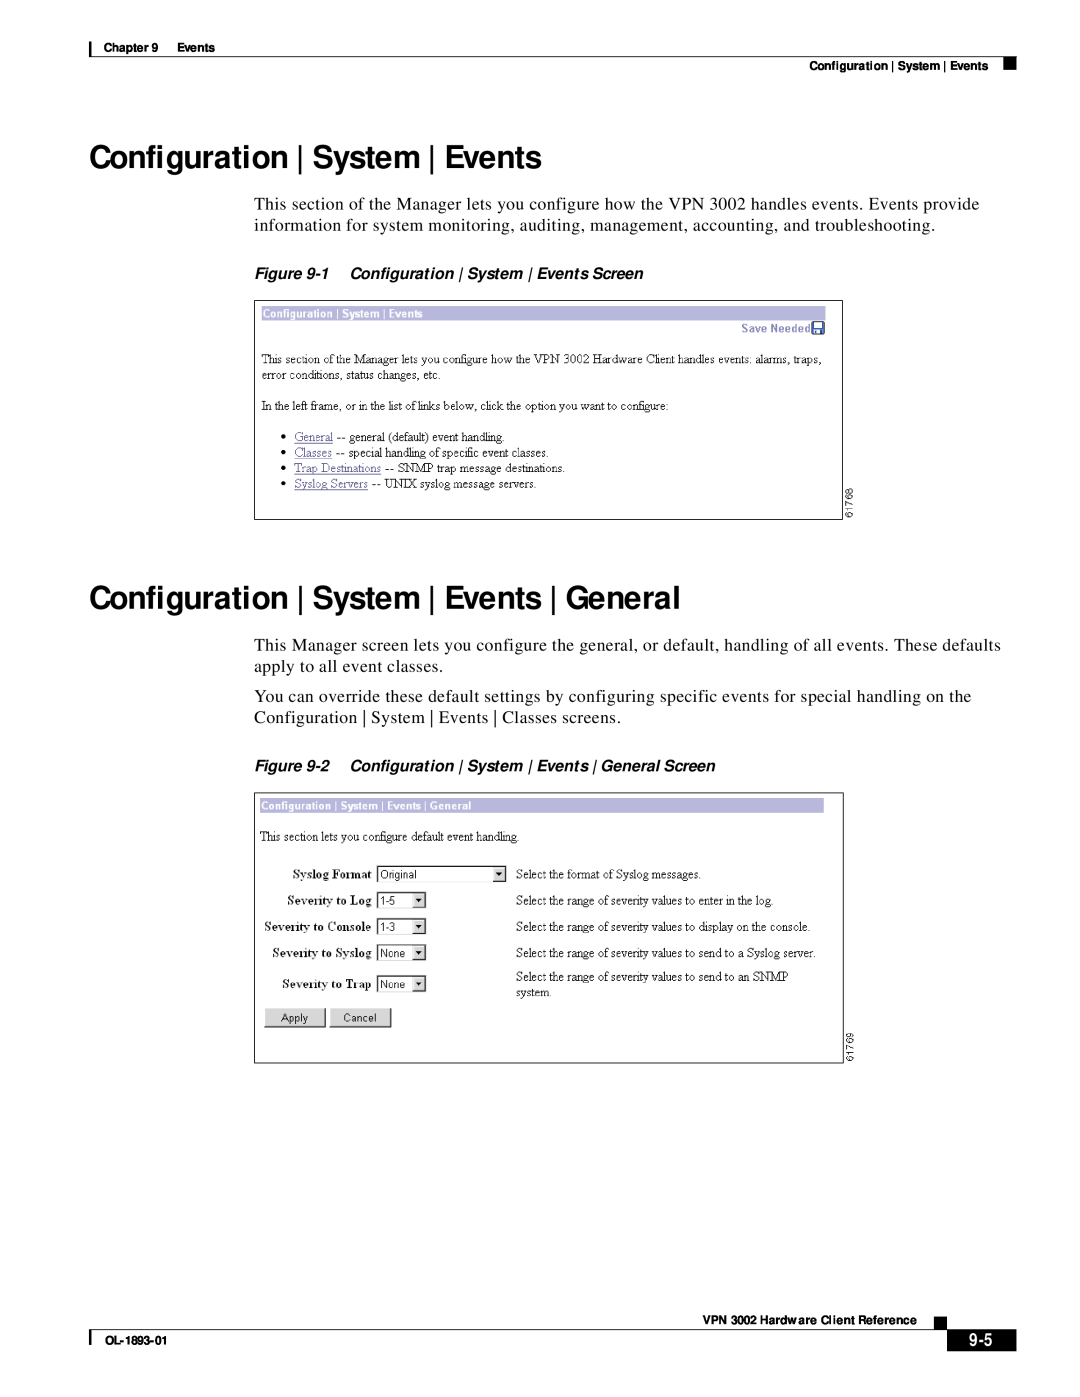 Cisco Systems VPN 3002 manual Configuration | System | Events, Configuration System Events General 